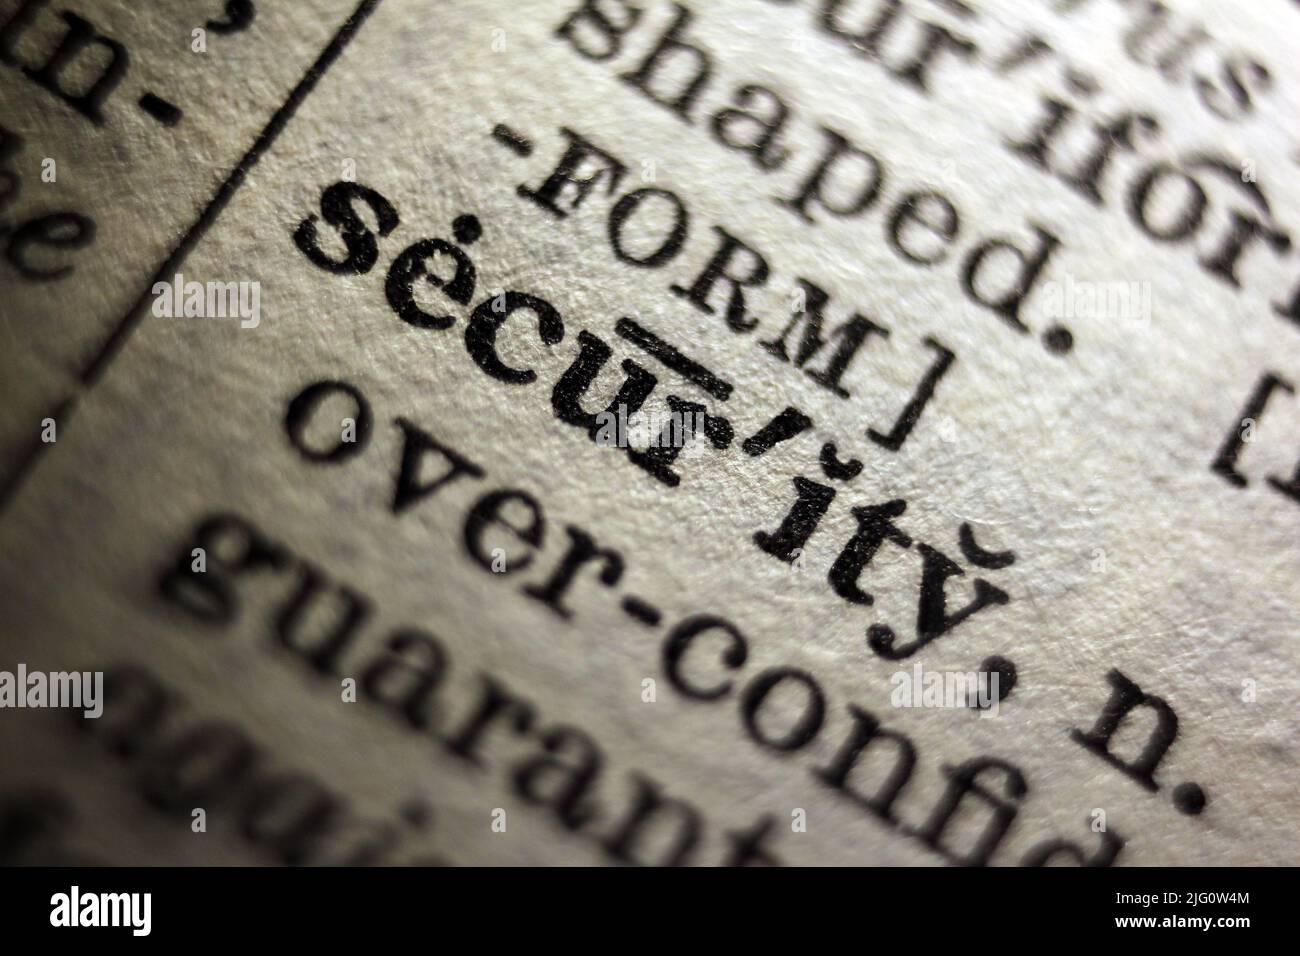 Word 'security' printed on dictionary page, macro close-up Stock Photo